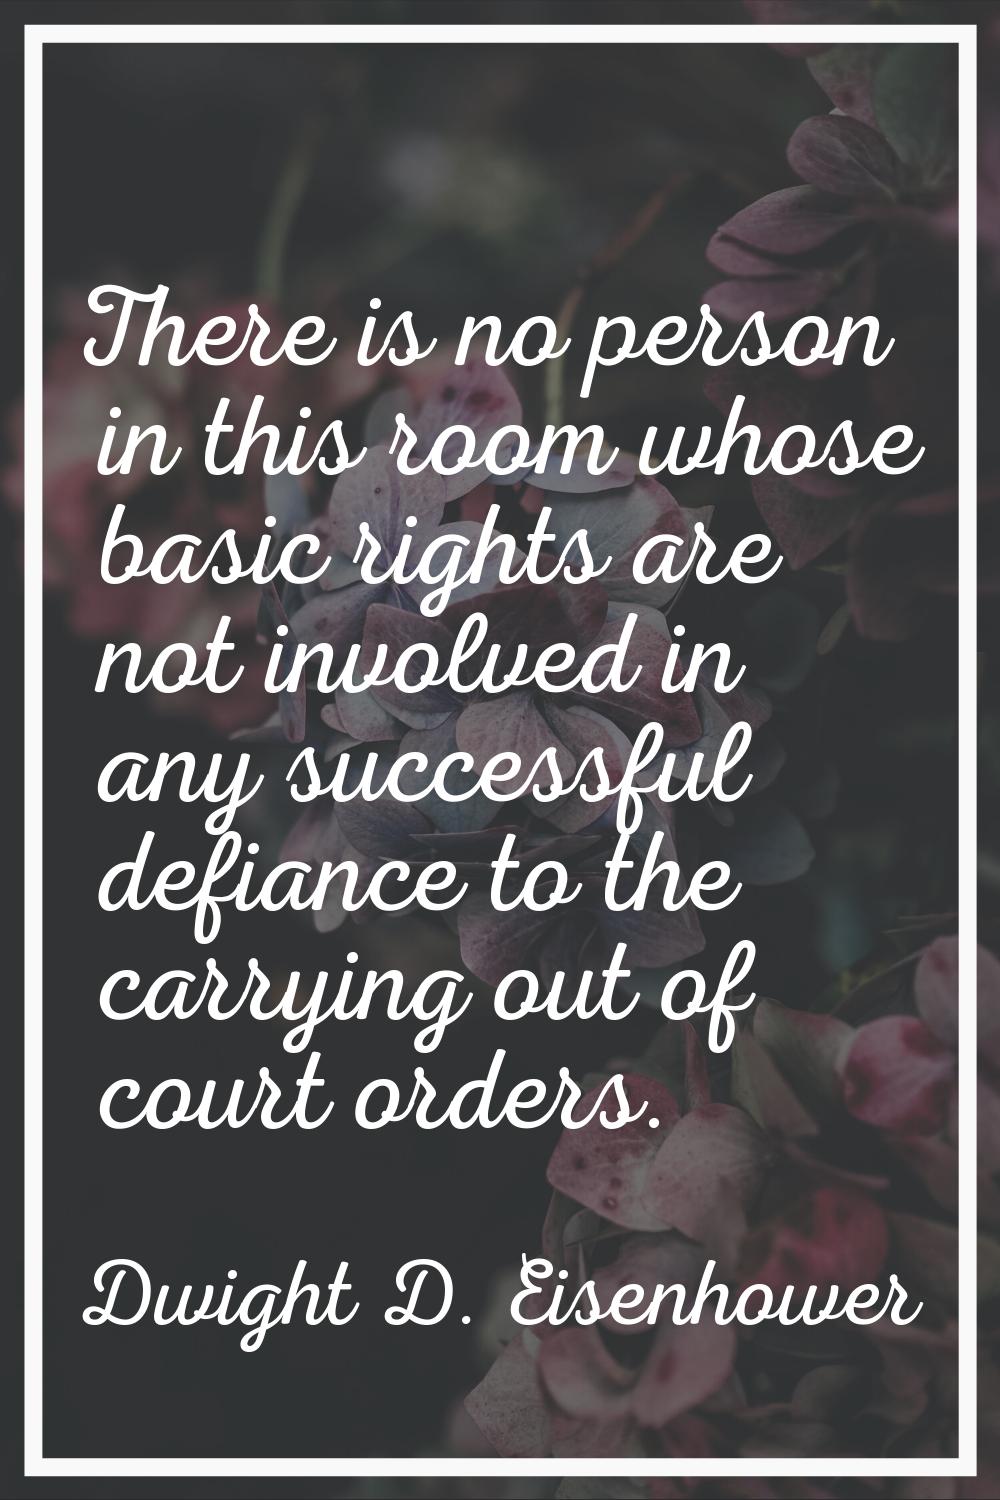 There is no person in this room whose basic rights are not involved in any successful defiance to t